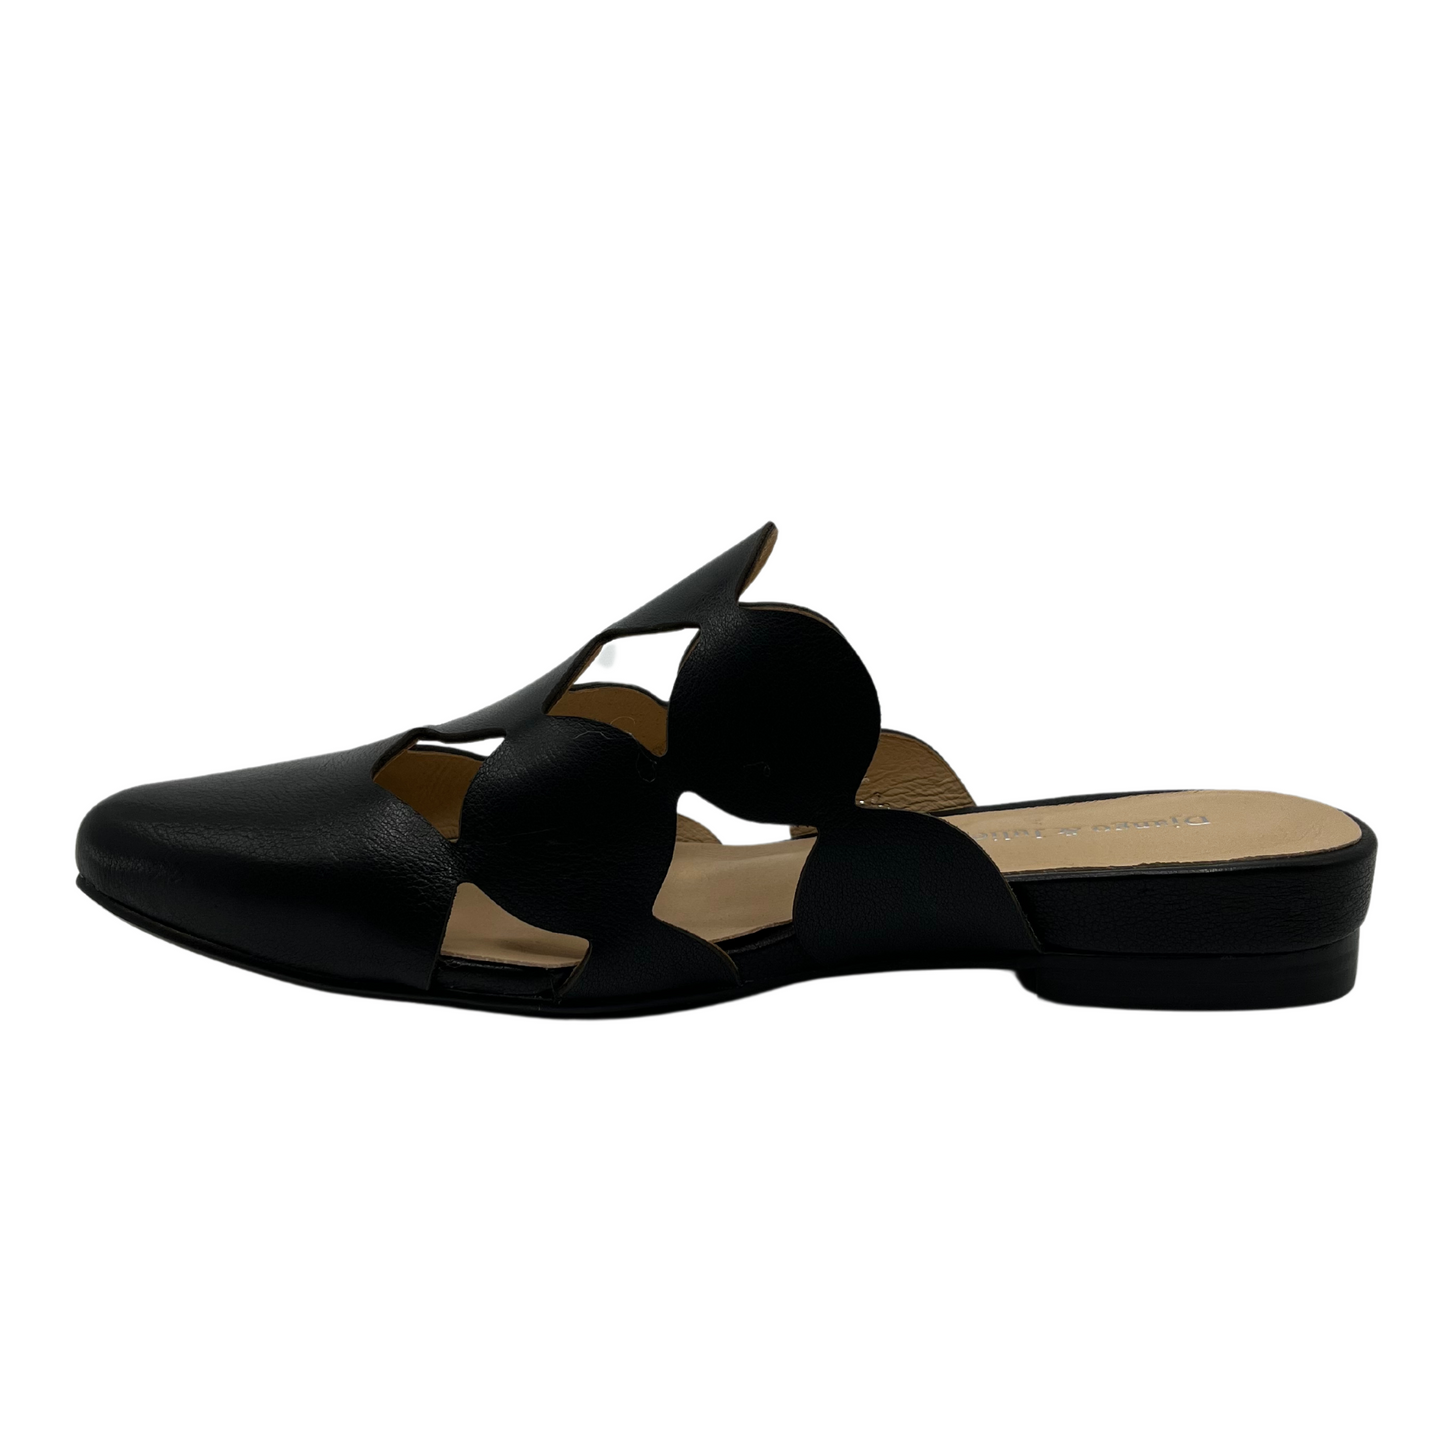 Left facing view of black leather slip on mule with circular cutouts and 1 inch heel